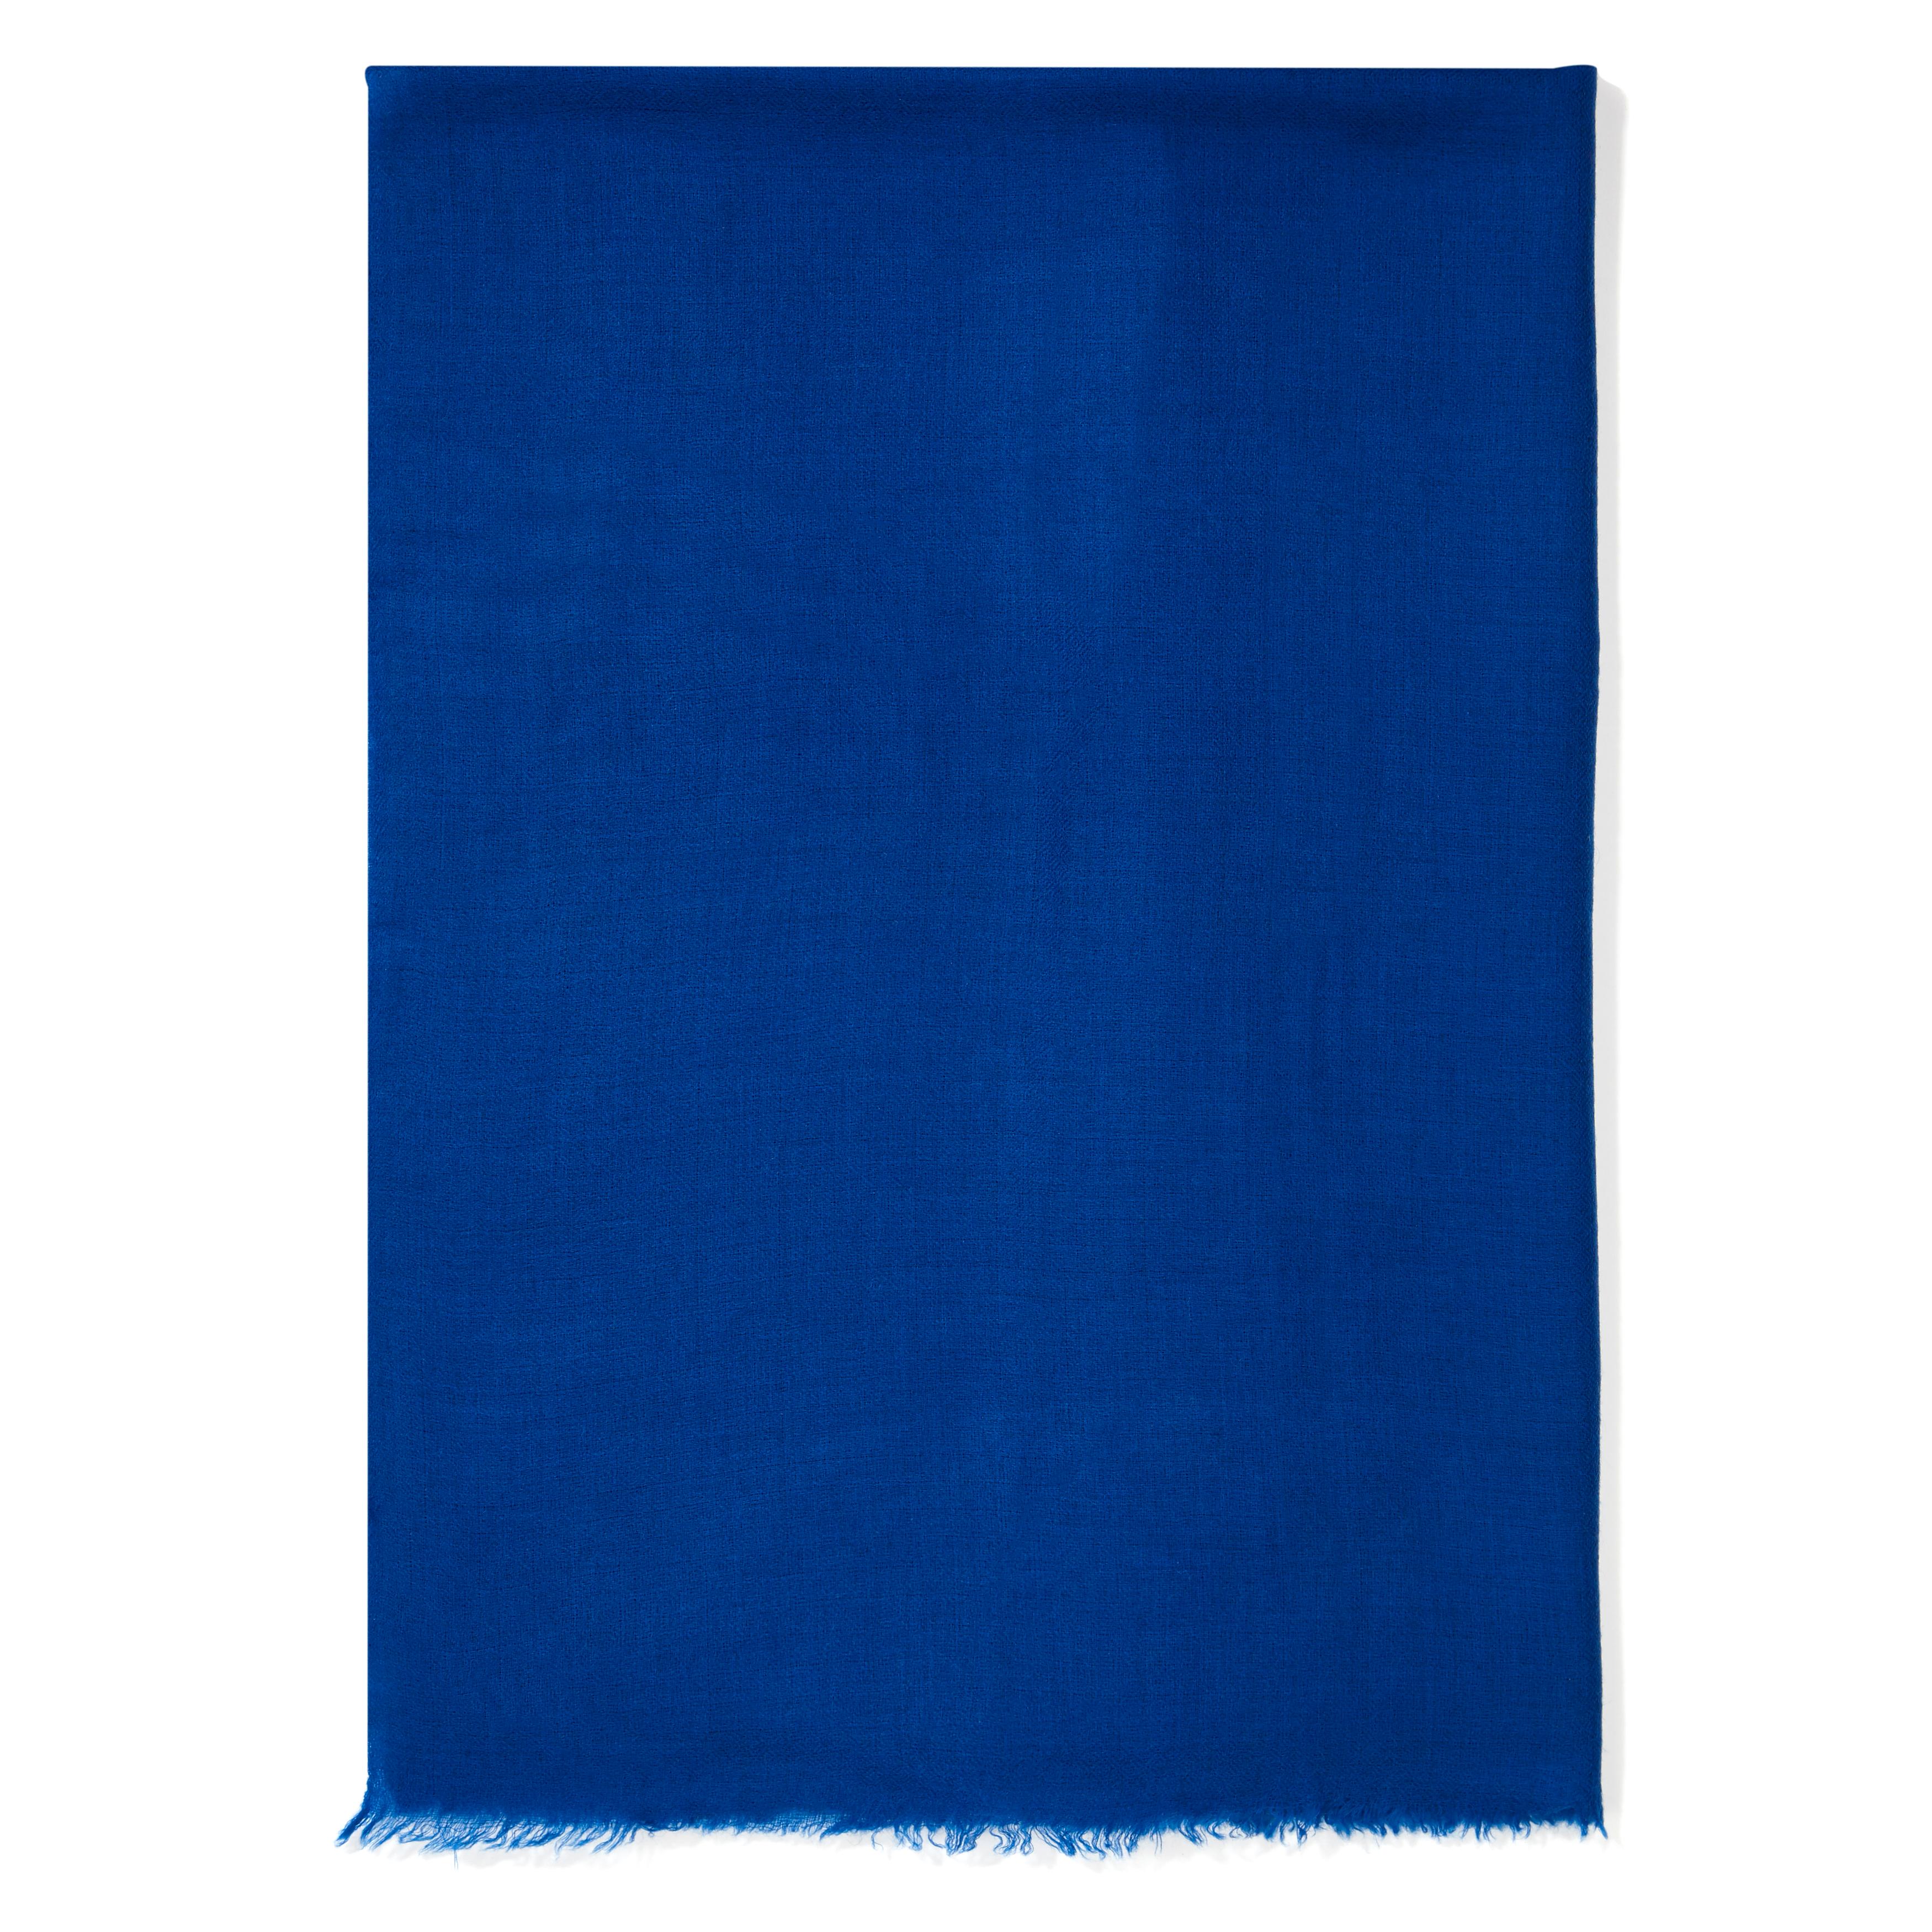 The perfect Christmas gift for someone special.  
Verheyen London’s shawl is spun from the finest lightweight cashmere from Kashmir India. Its warmth envelopes you with luxury, perfect for travel and comfort wherever you are.


PRODUCT